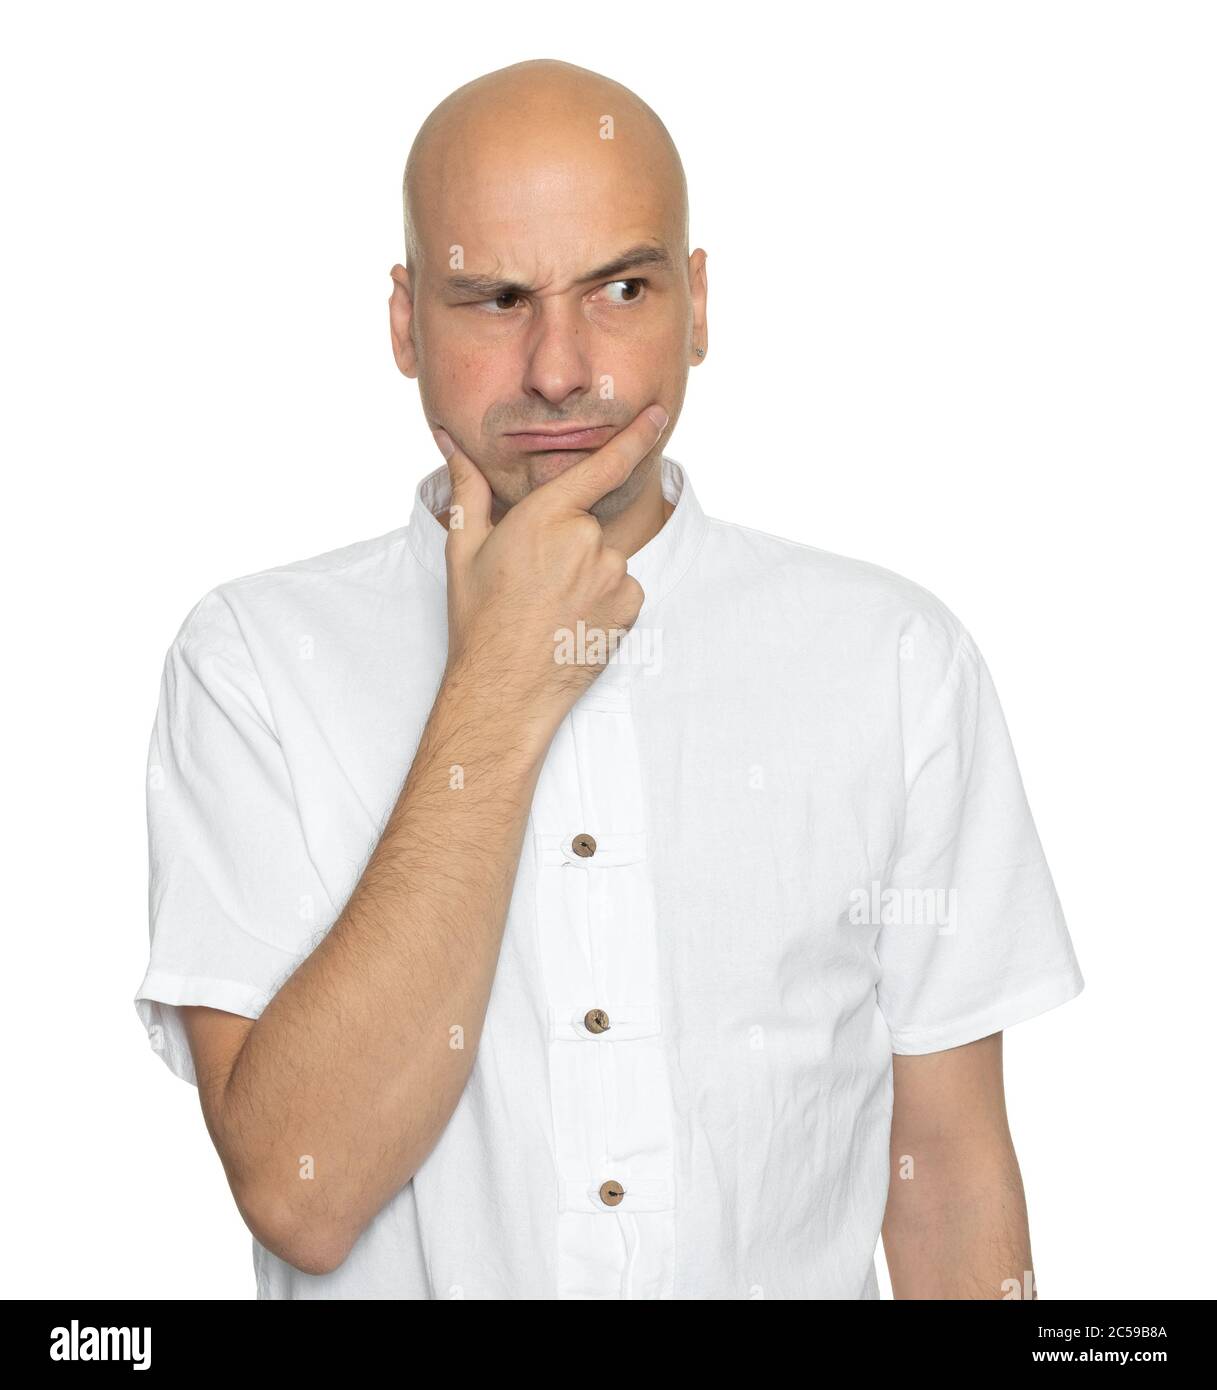 angry bald man looking away isolated on white background Stock Photo